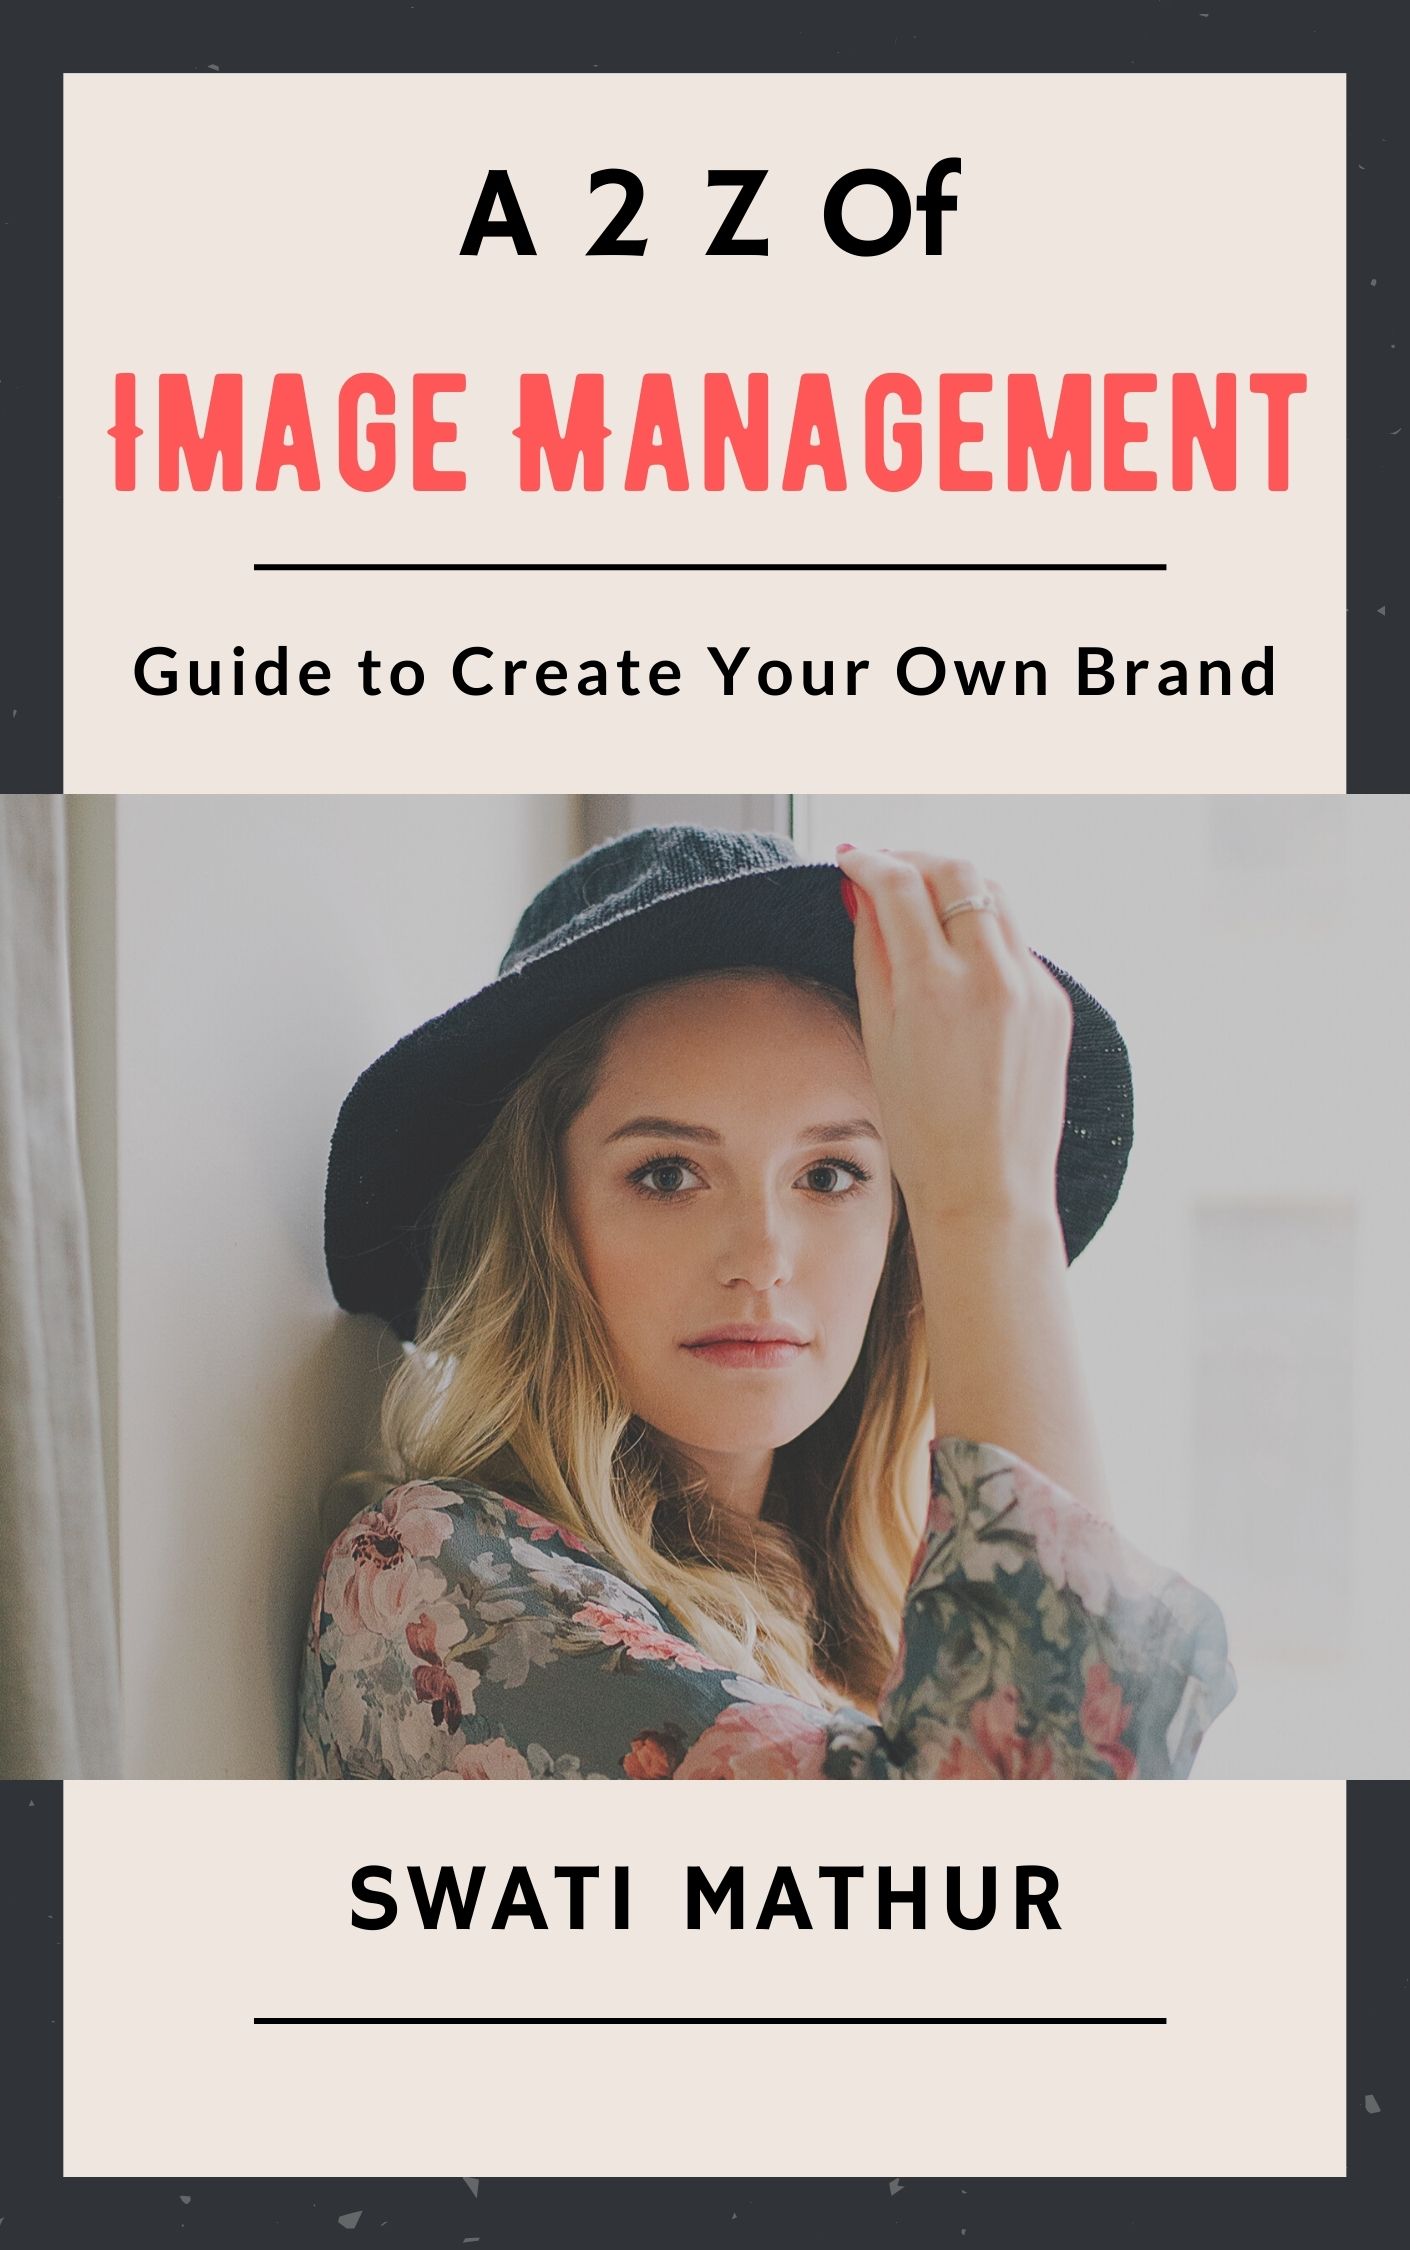 https://www.theblogchatter.com/download/a2z-of-image-management-by-swati-mathur